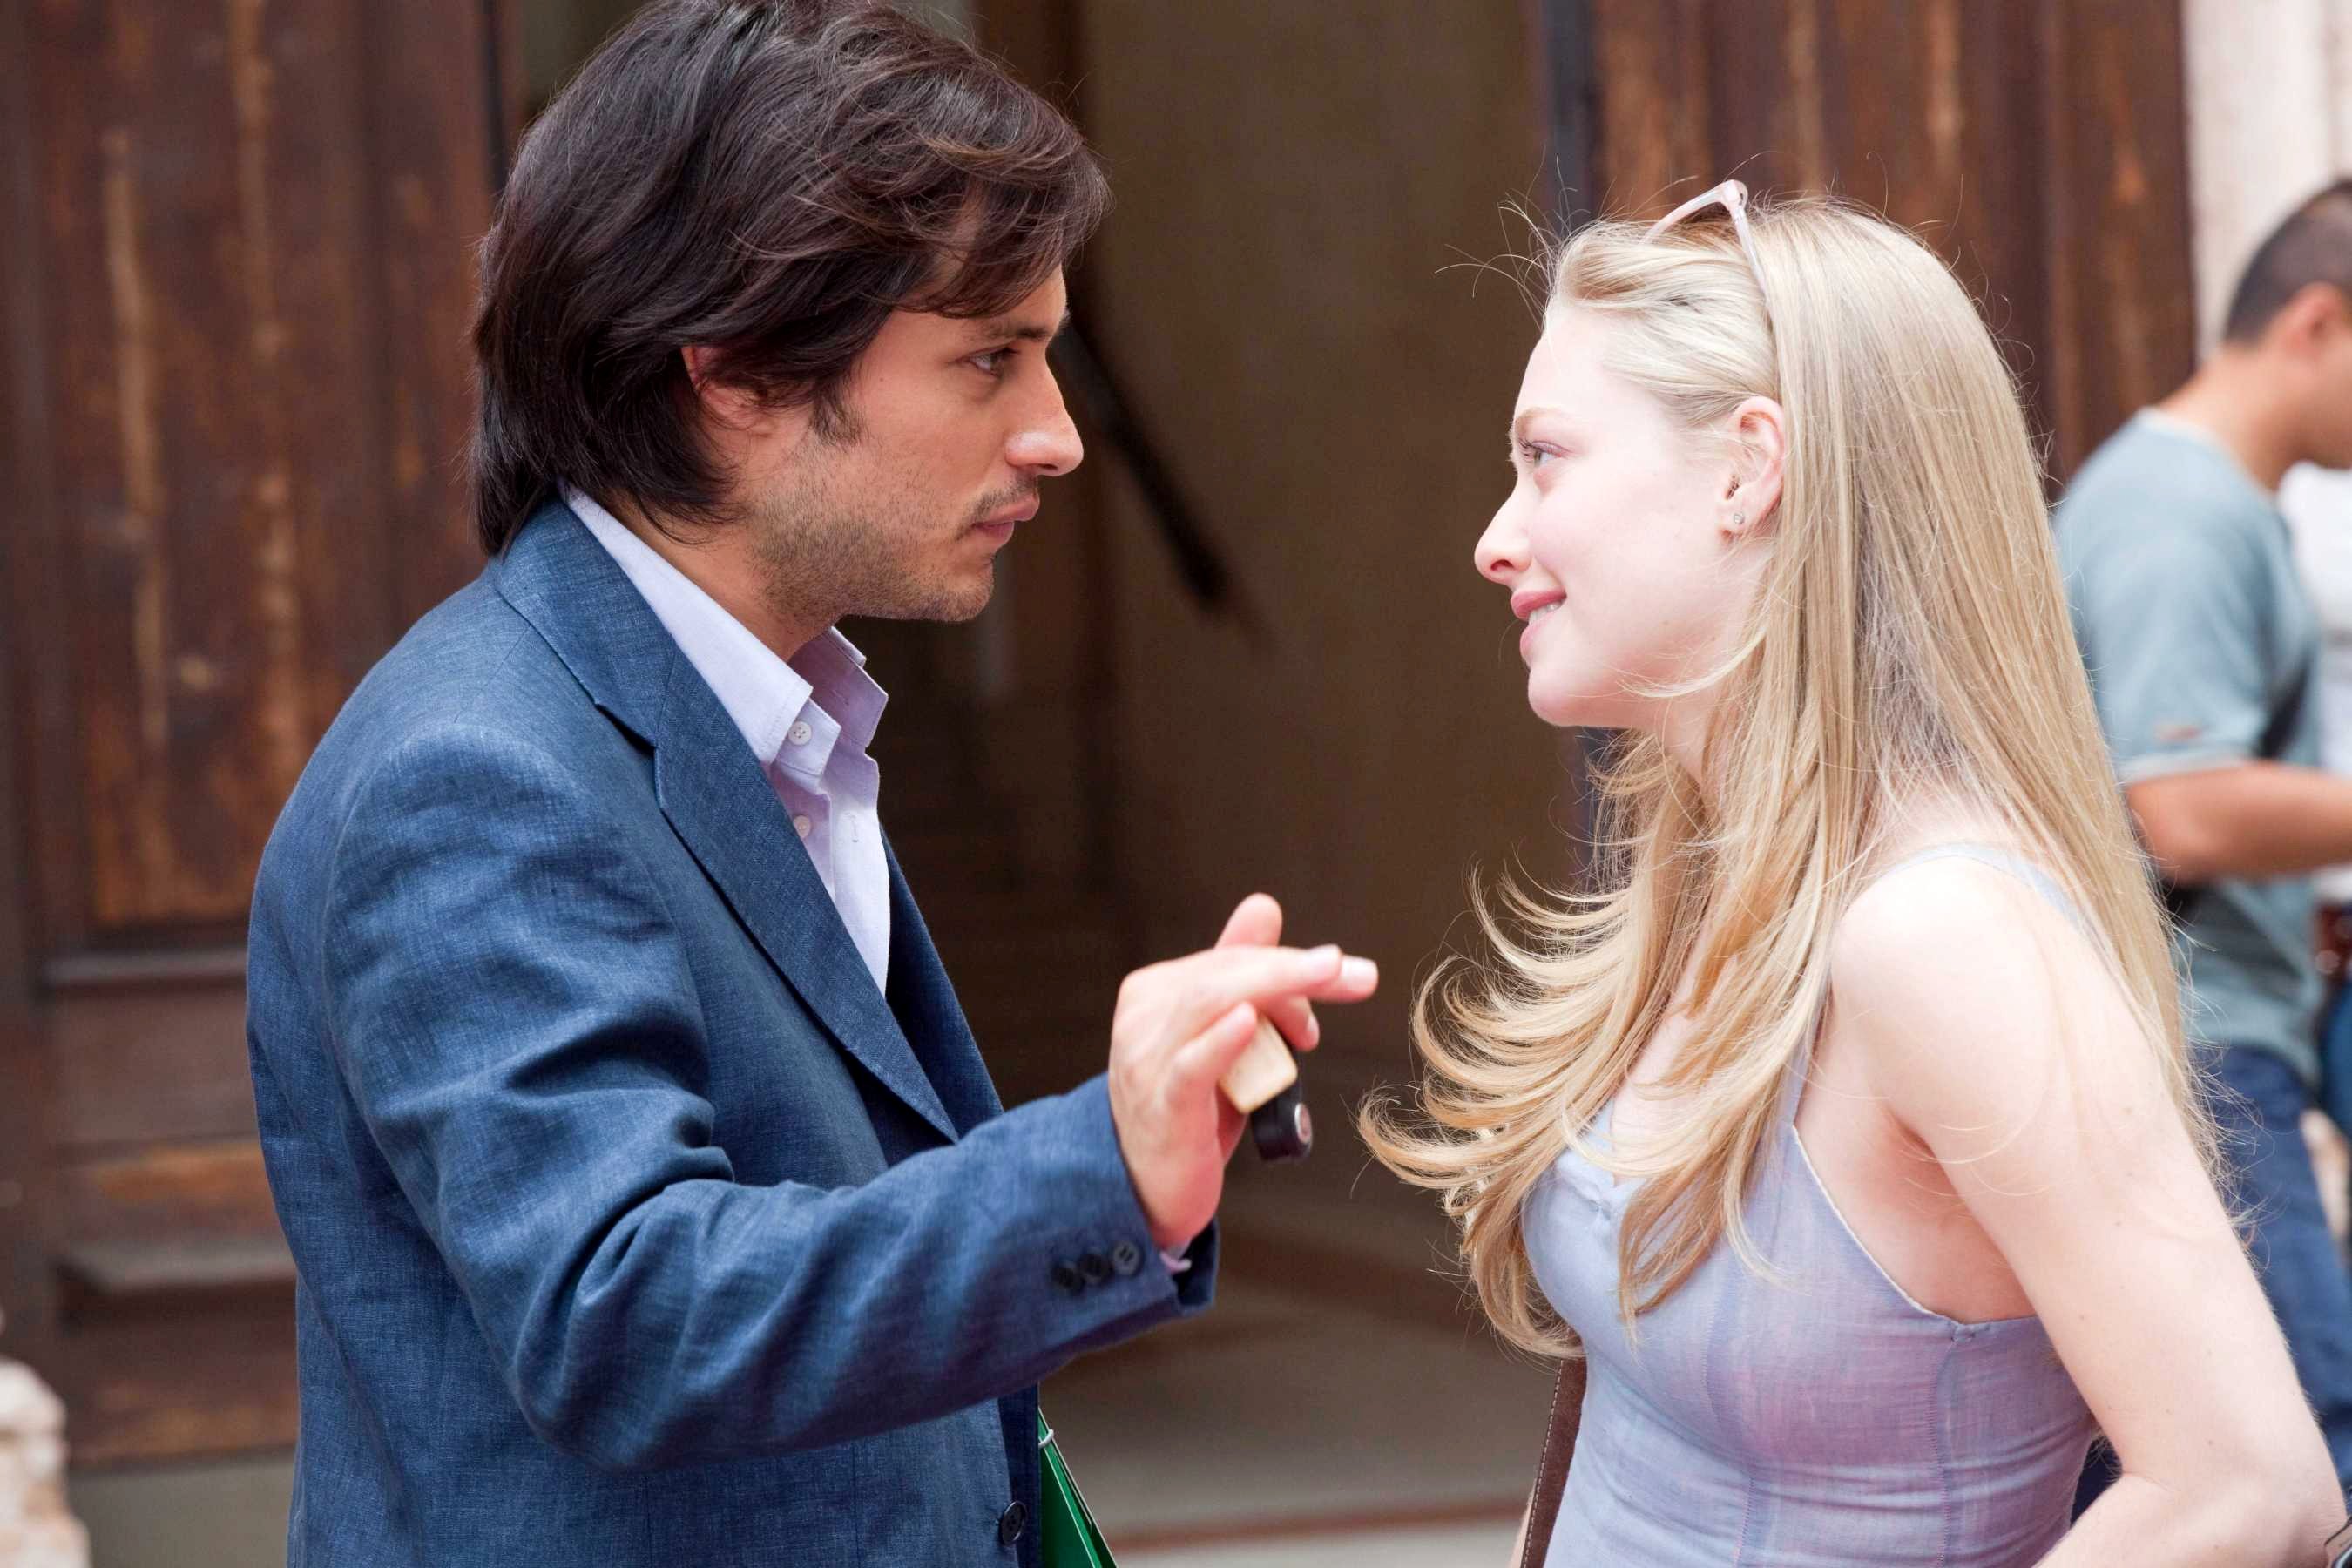 Gael Garcia Bernal stars as Victor and Amanda Seyfried stars as Sophie in Summit Entertainment's Letters to Juliet (2010). Photo credit by John Johnson.